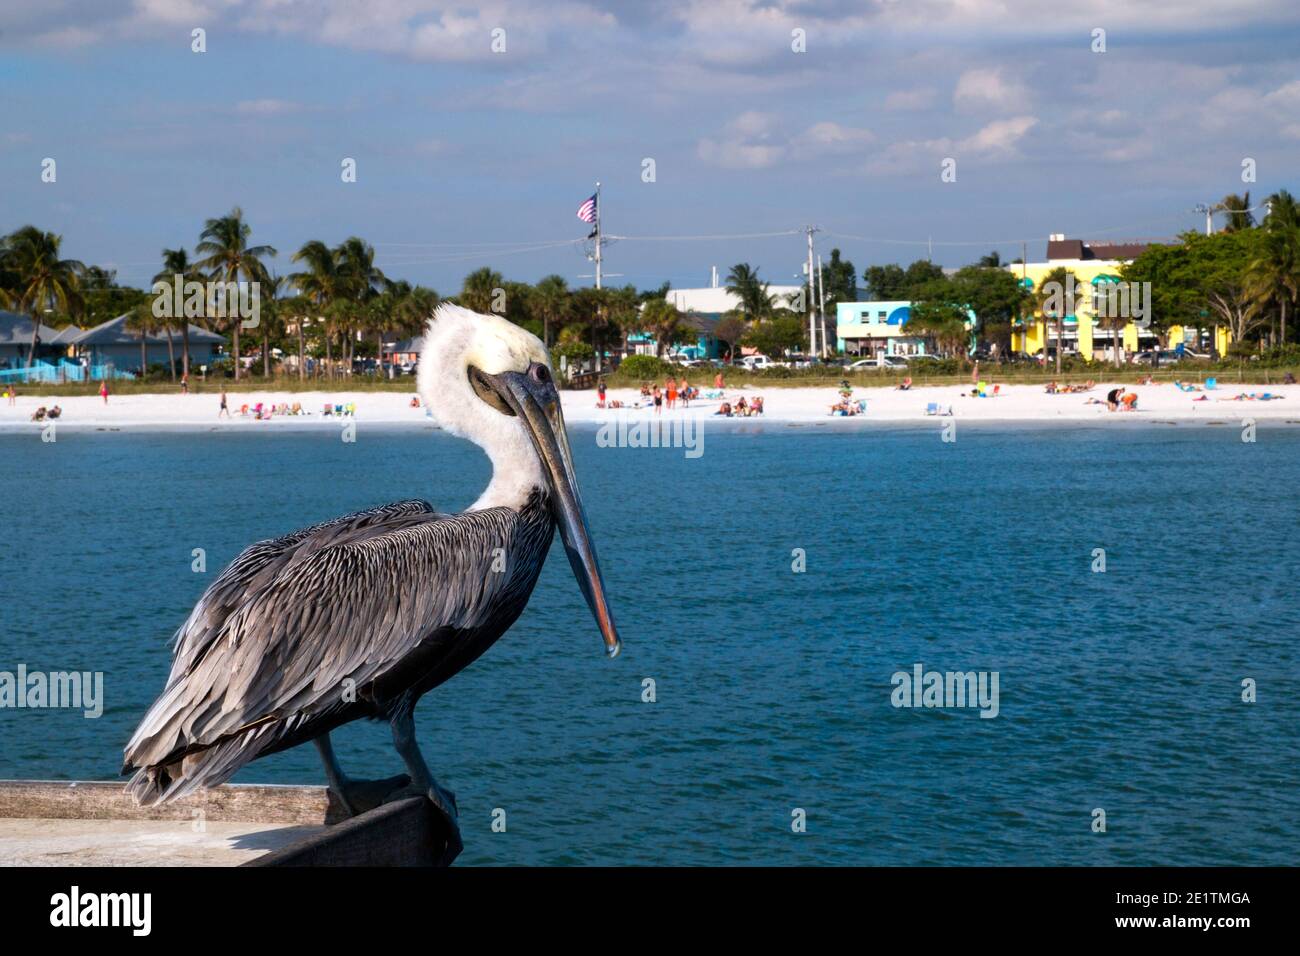 Wild Pelican close up and view of the Fort Myers Beach at Estero Island in sunny Florida, blue sea water and white sandy beach with tourists Stock Photo